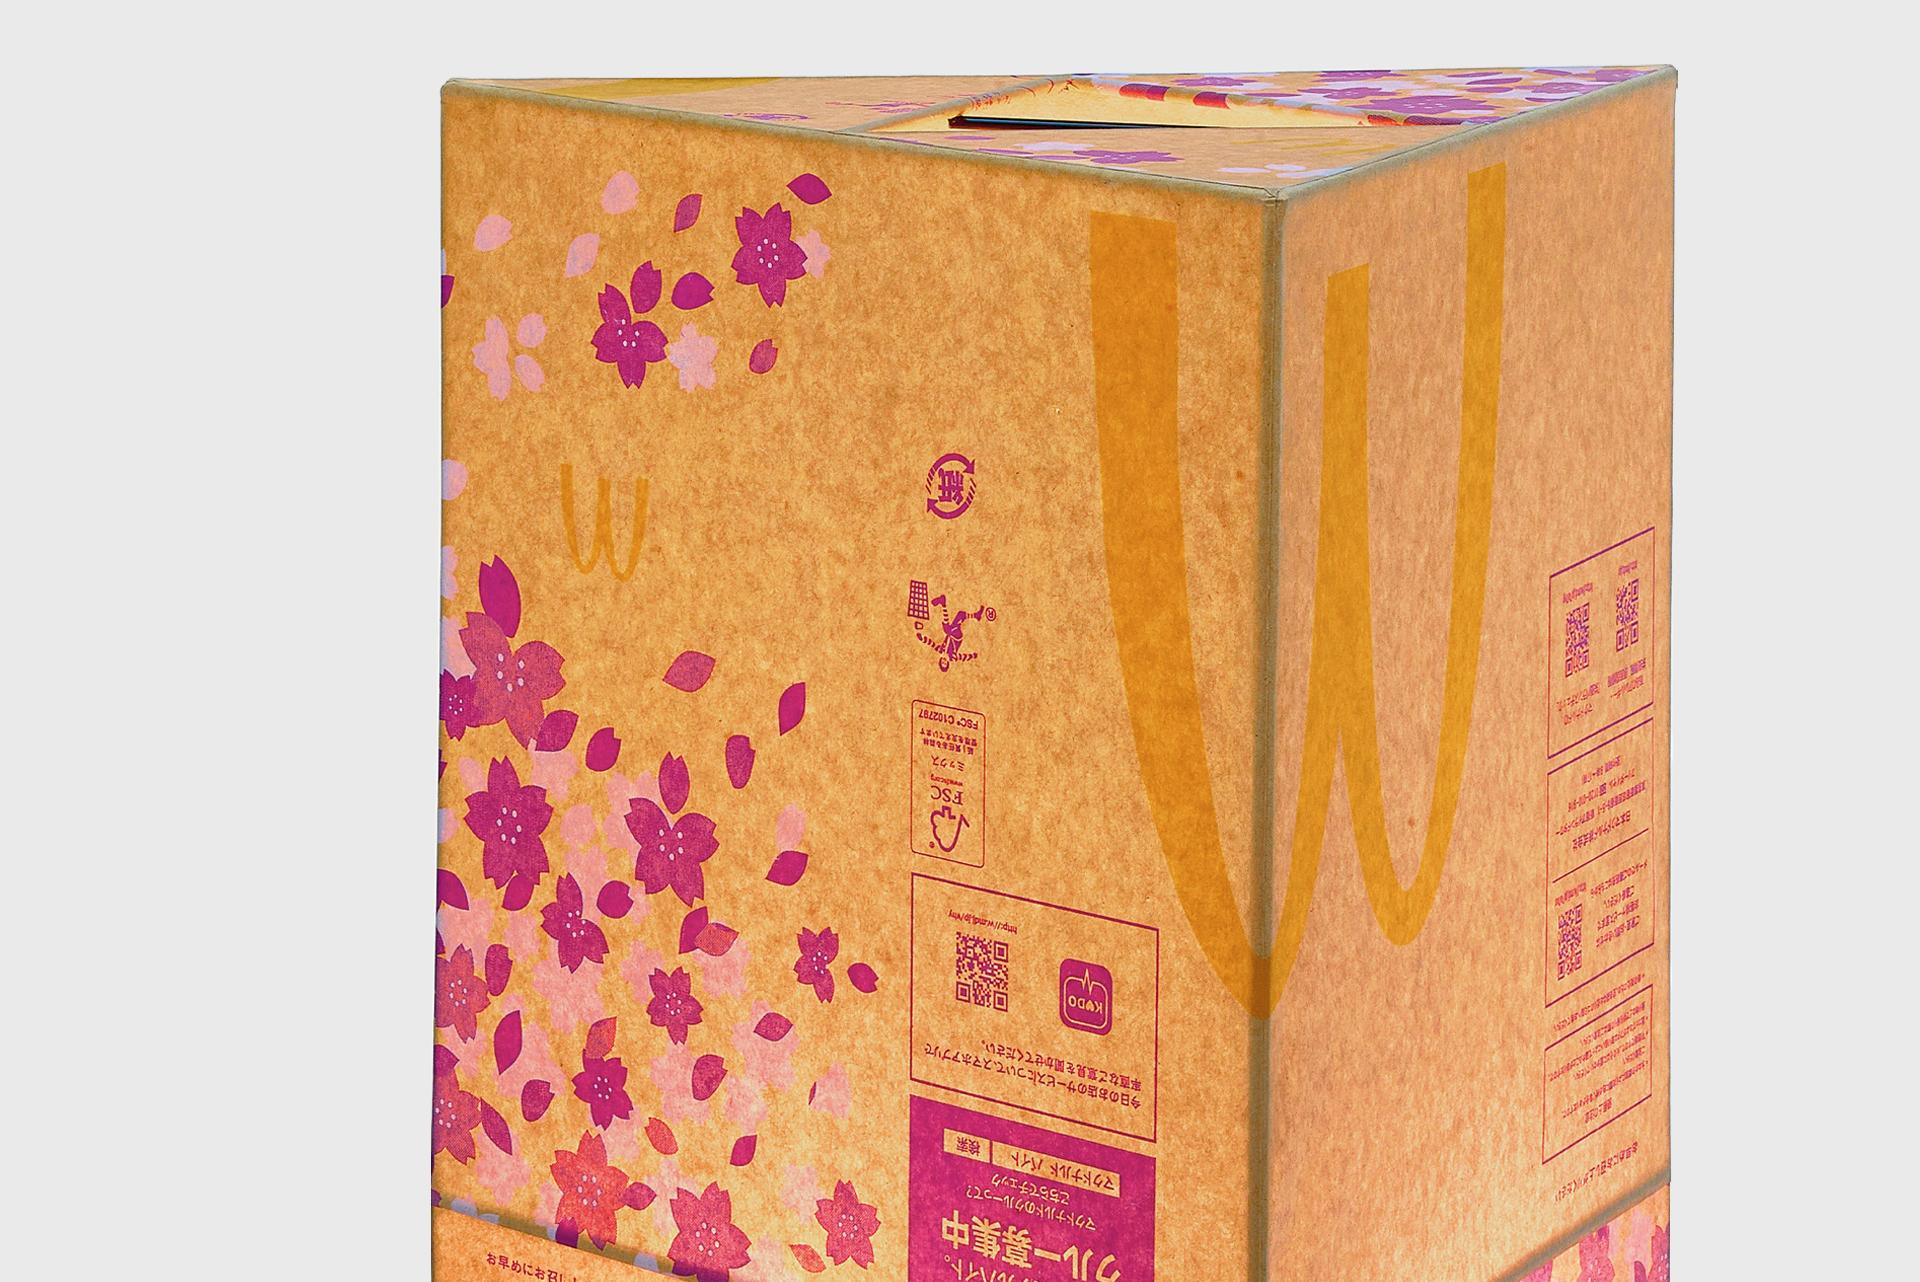 Cherry Blossom Edition McDonald's Paperbag Lamp 4-2.
Manufactured by Gyuhan Lee.
Korea, 2023.
Paper, Steel and Electrical parts.

Measurements
25 cm x 25 cm x 64h cm
9,9 in x 9,9 in x 25,2h in

Exhibitions
Global Tools, 11th May - 14th July 2023,